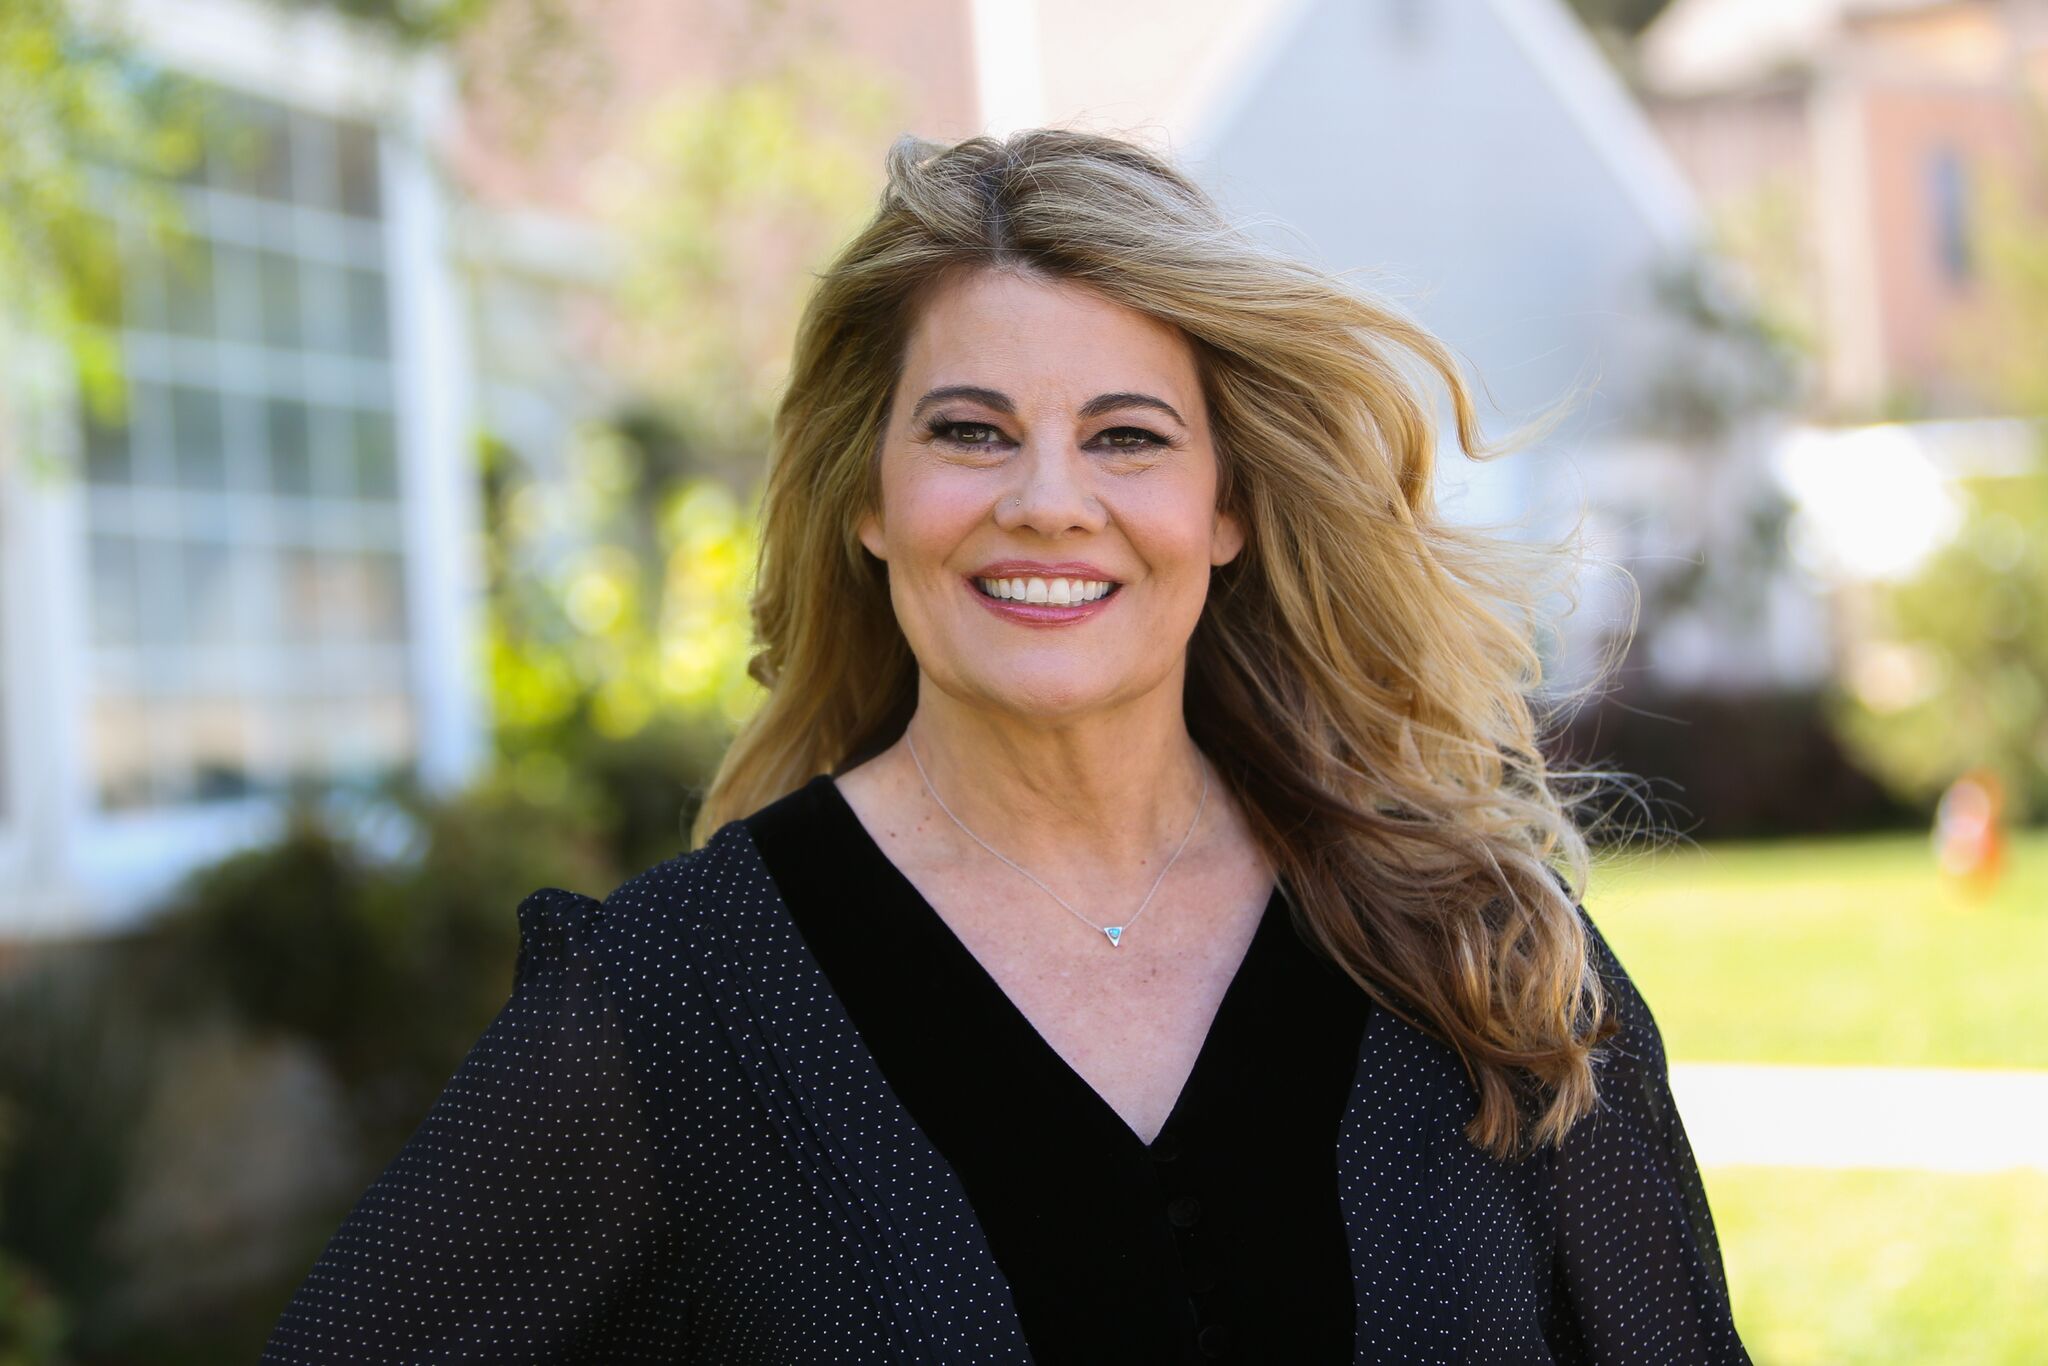 Lisa Whelchel visits Hallmark's "Home & Family" at Universal Studios Hollywood  | Getty Images